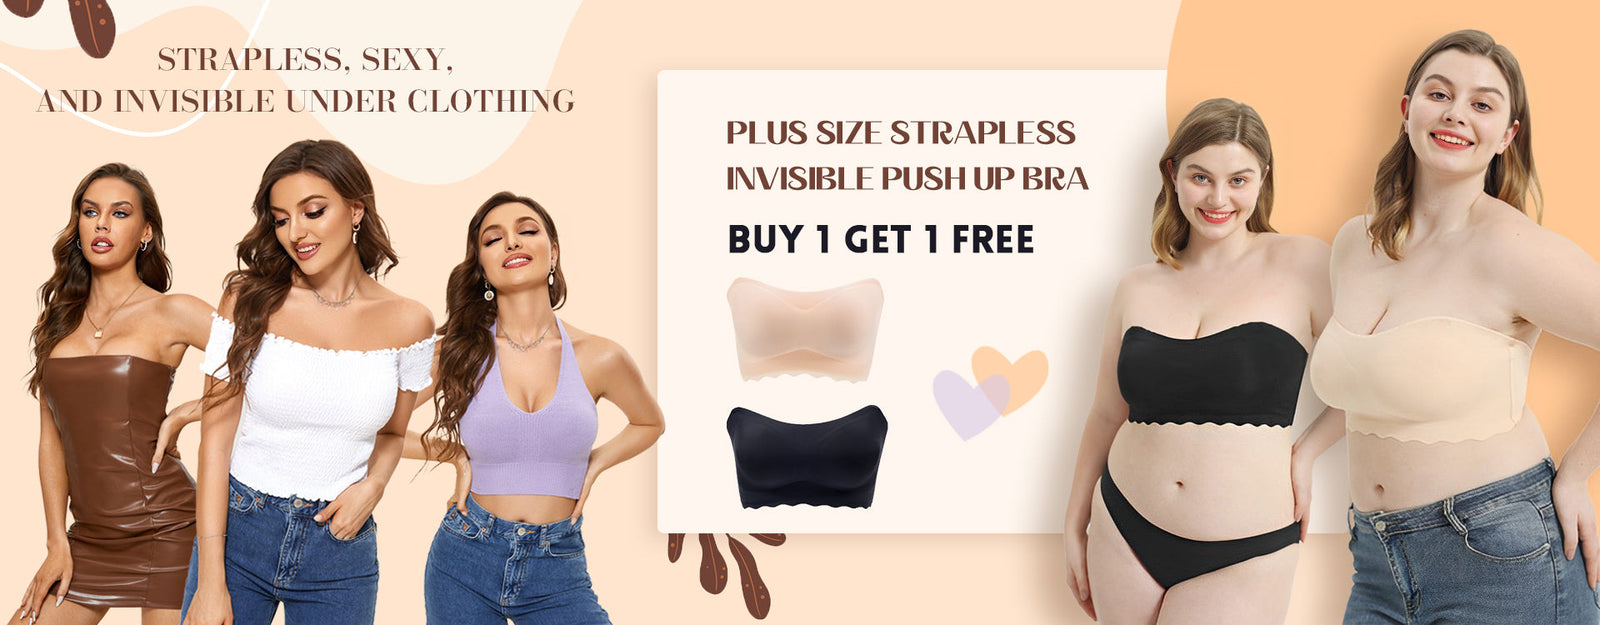 Bettybra®Strapless Backless Adhesive Invisible Lift up & Push up